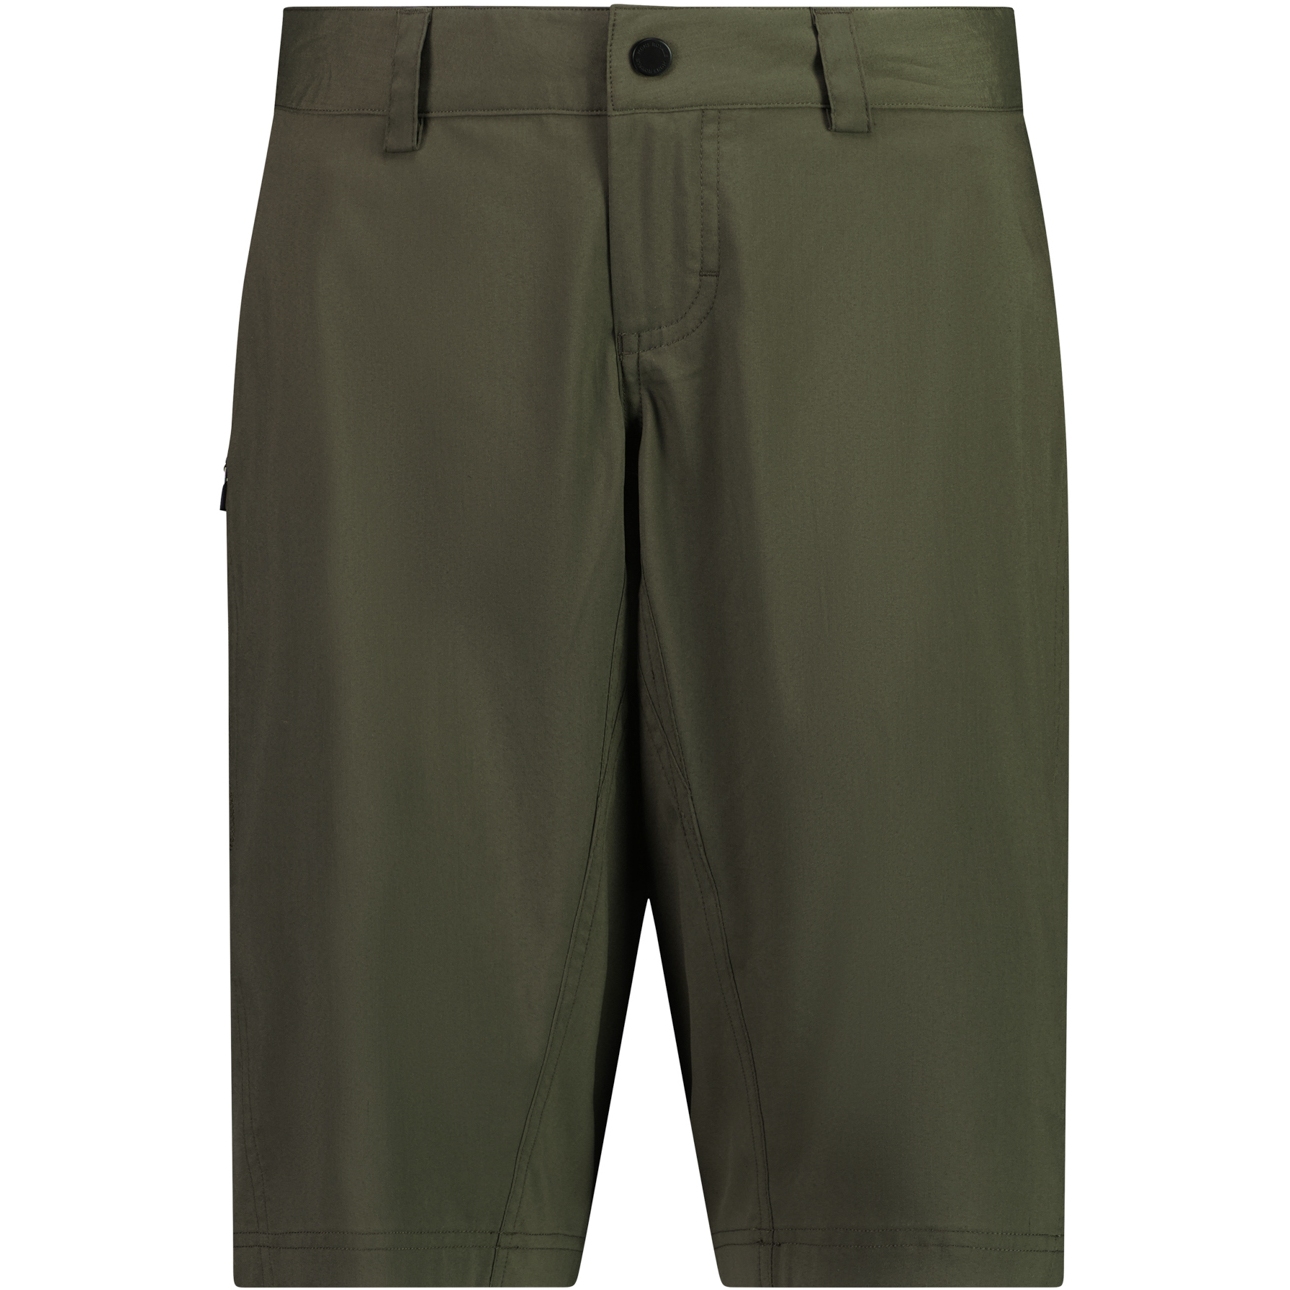 Picture of Mons Royale Virage Bike Shorts Women - olive night